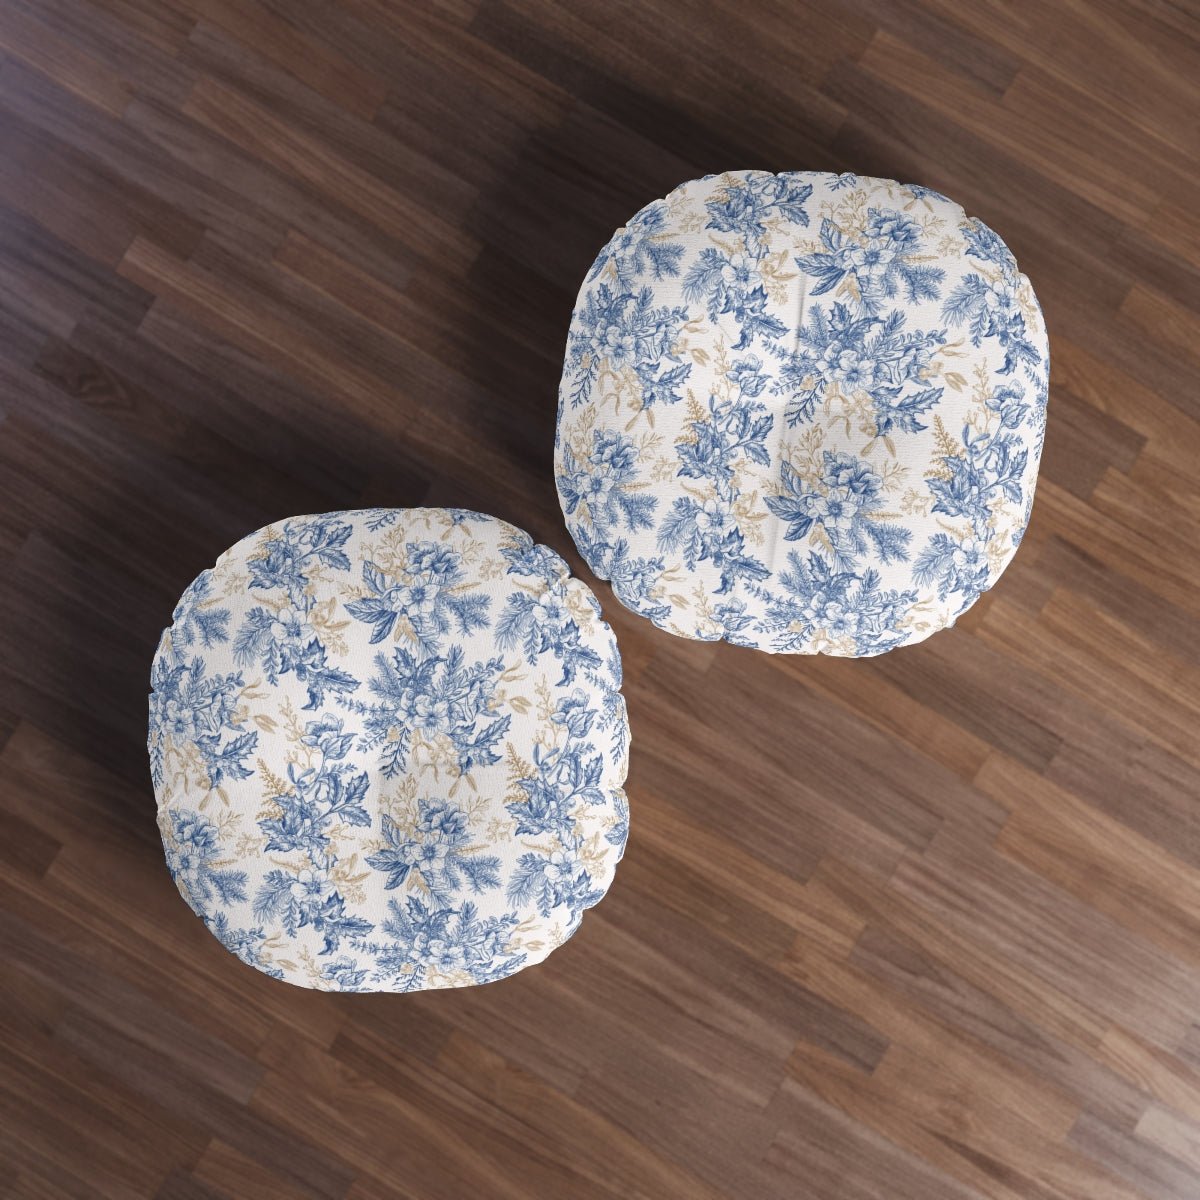 Winter Hellebore Flowers Round Tufted Floor Pillow - Puffin Lime